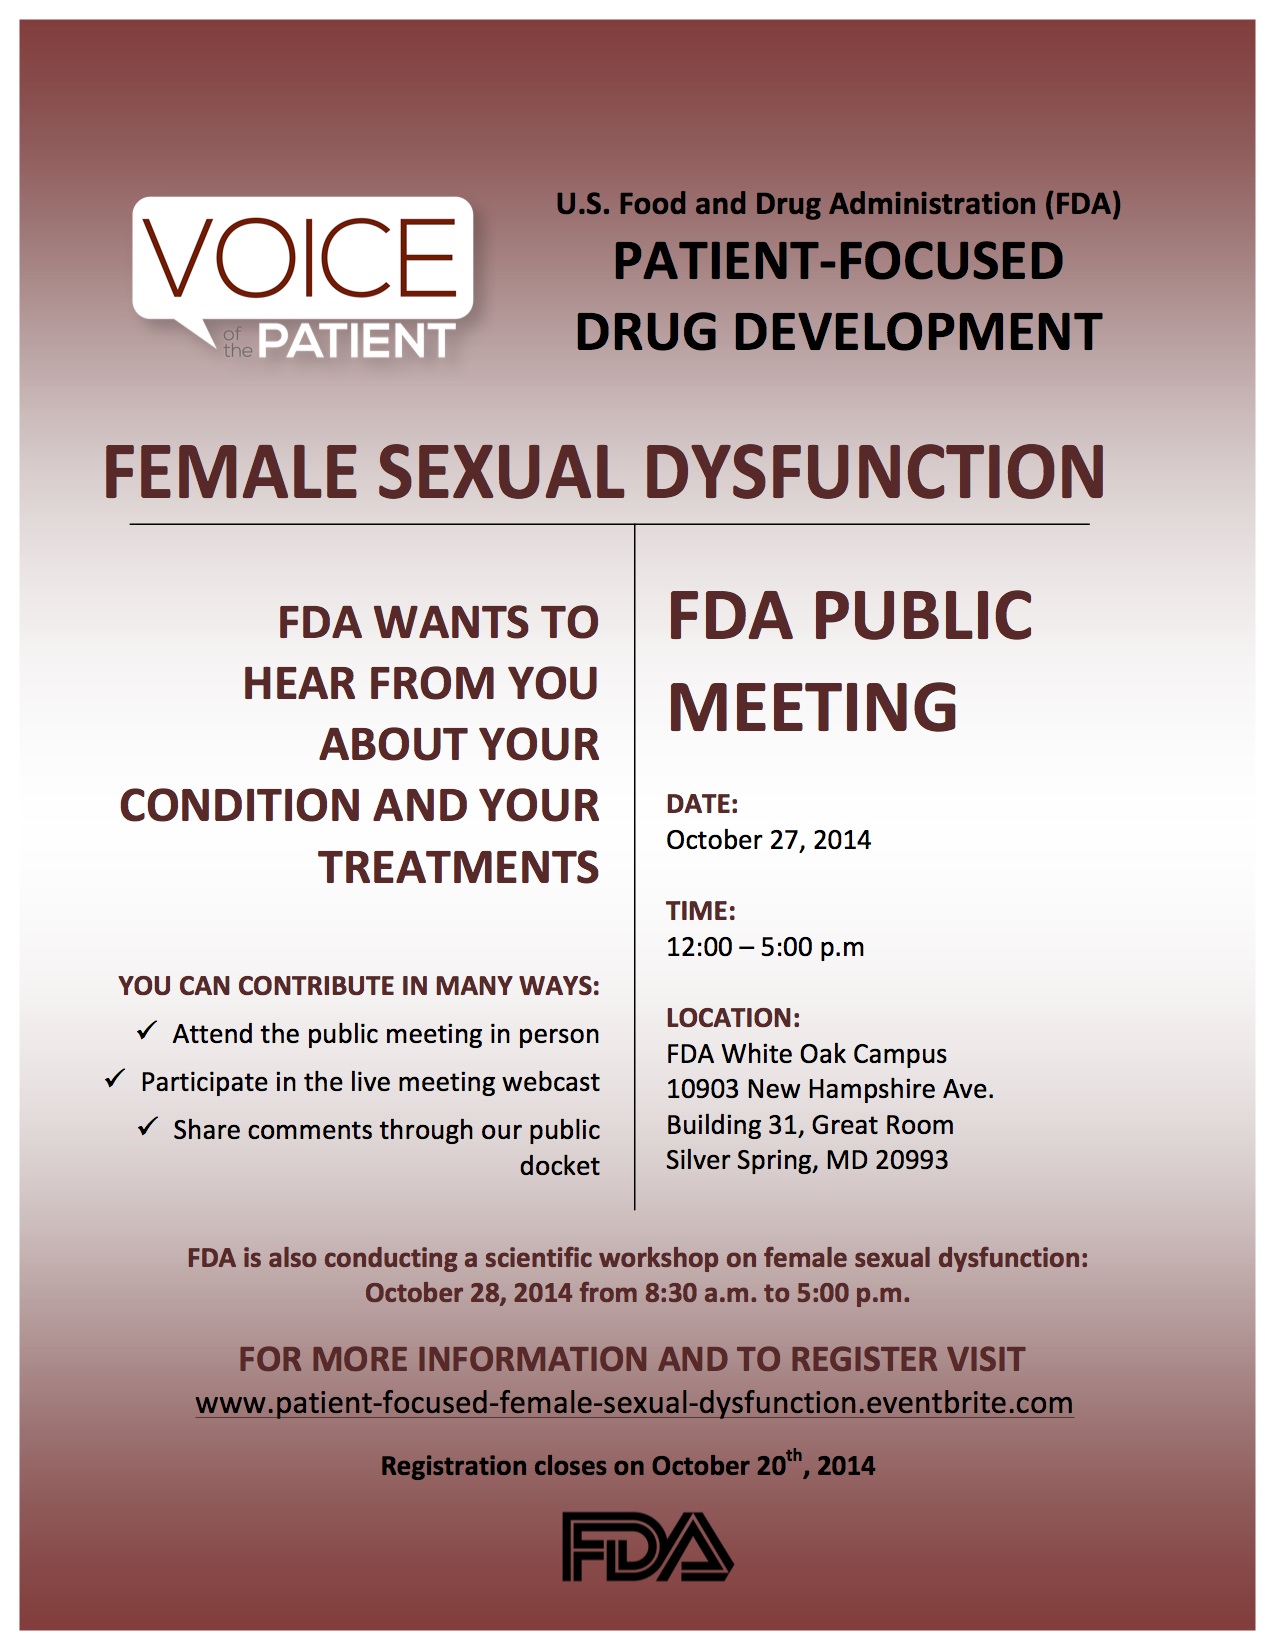 Female Sexual Dysfunction Public Meeting